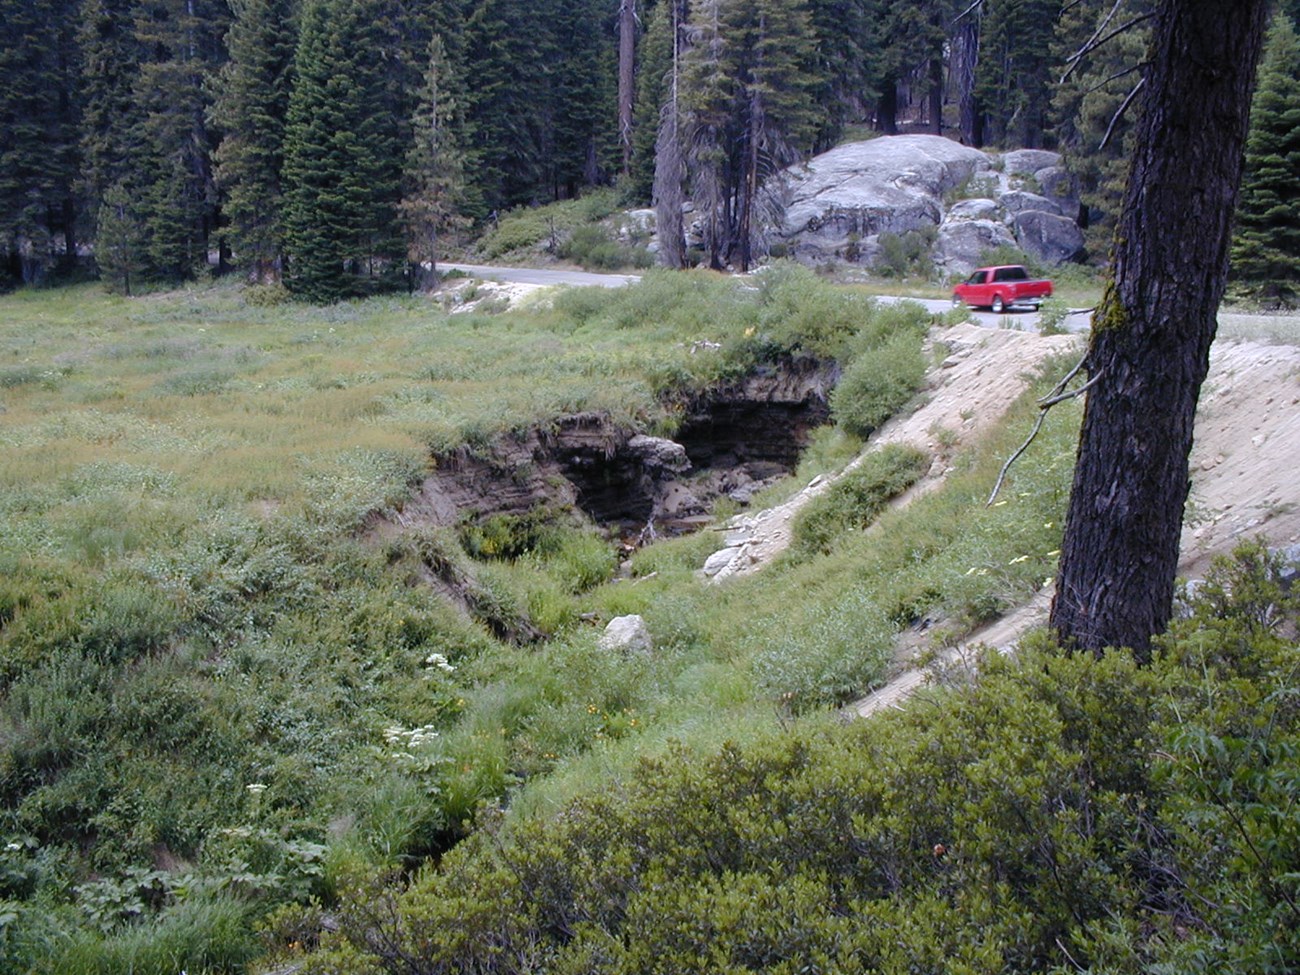 View of deep, eroded gully in a meadow with a road at the head of the gully and a truck driving by.